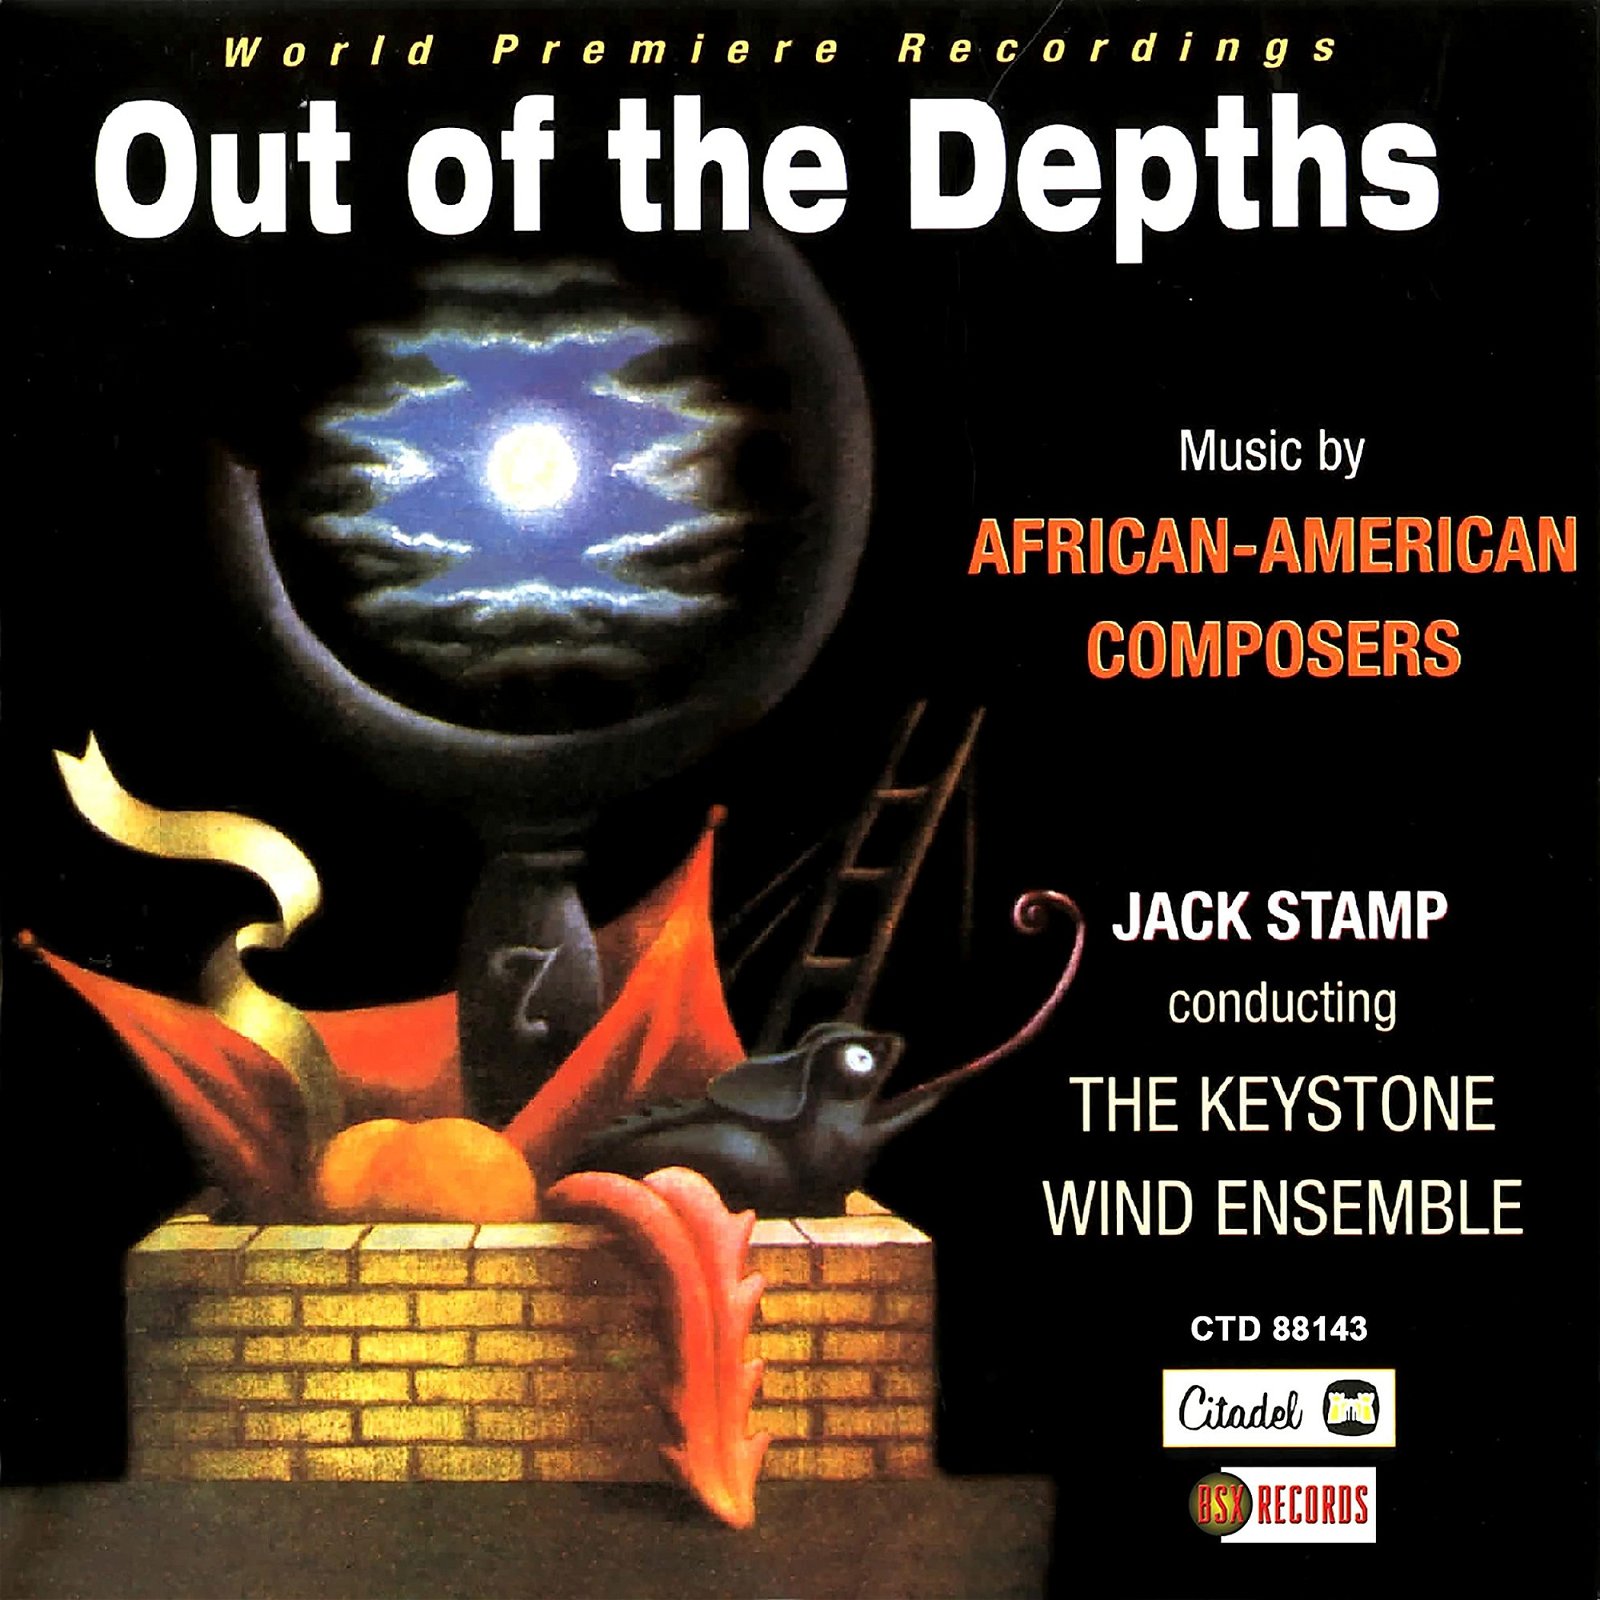 CD Shop - KEYSTONE WIND ENSEMBLE OUT OF THE DEPTHS: MUSIC BY AFRICAN AMERICAN COMPOSERS